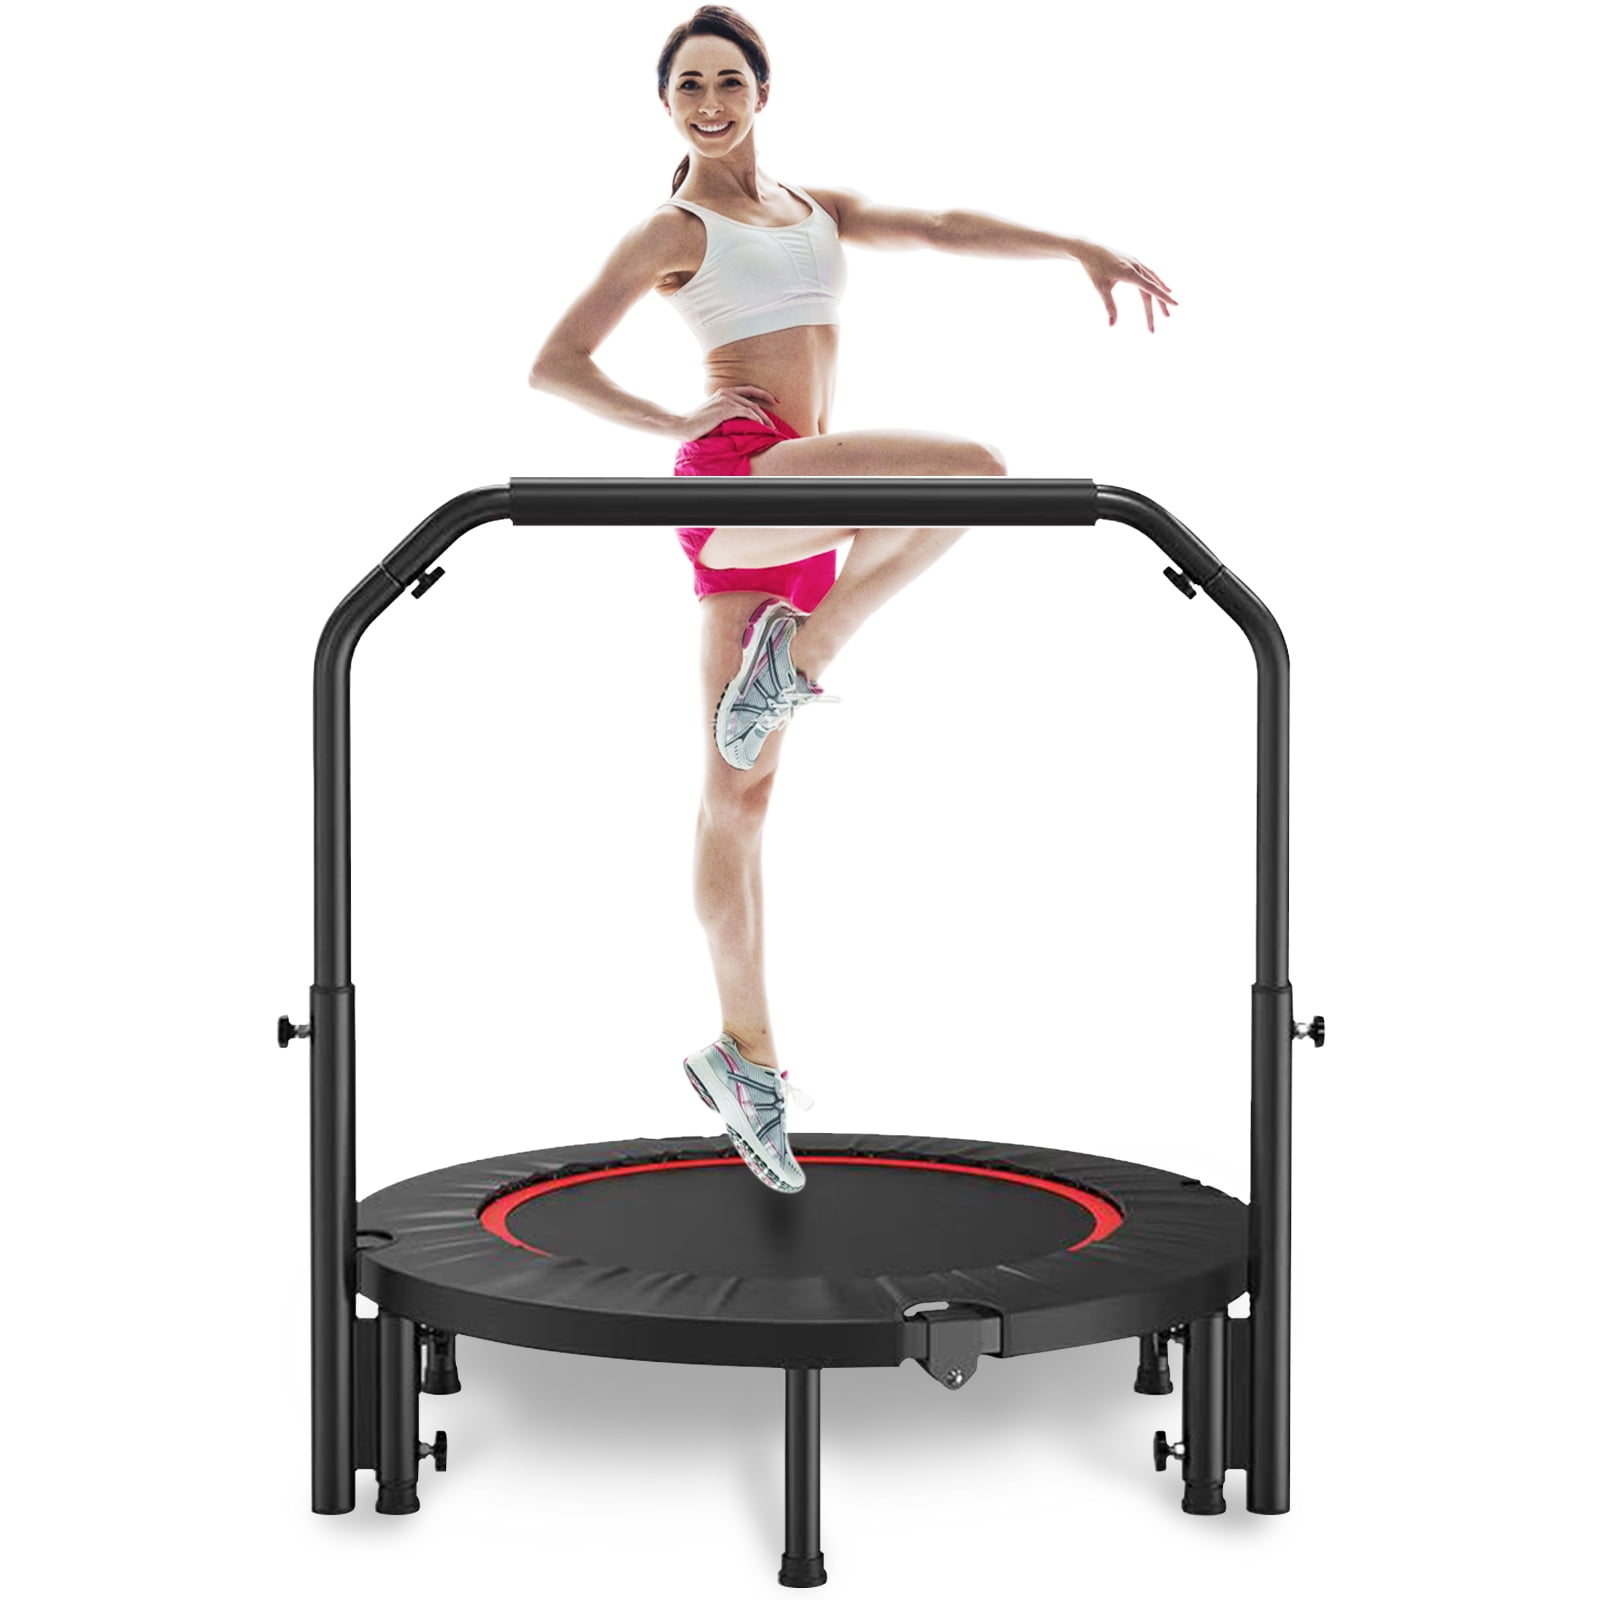 Zupapa Rebounder Trampoline 45 Inch for Adults and Kids Mini Fitness Trampoline with Adjustable Handle Bar for Indoor Garden Workout Cardio Training Max Load 330 lbs 